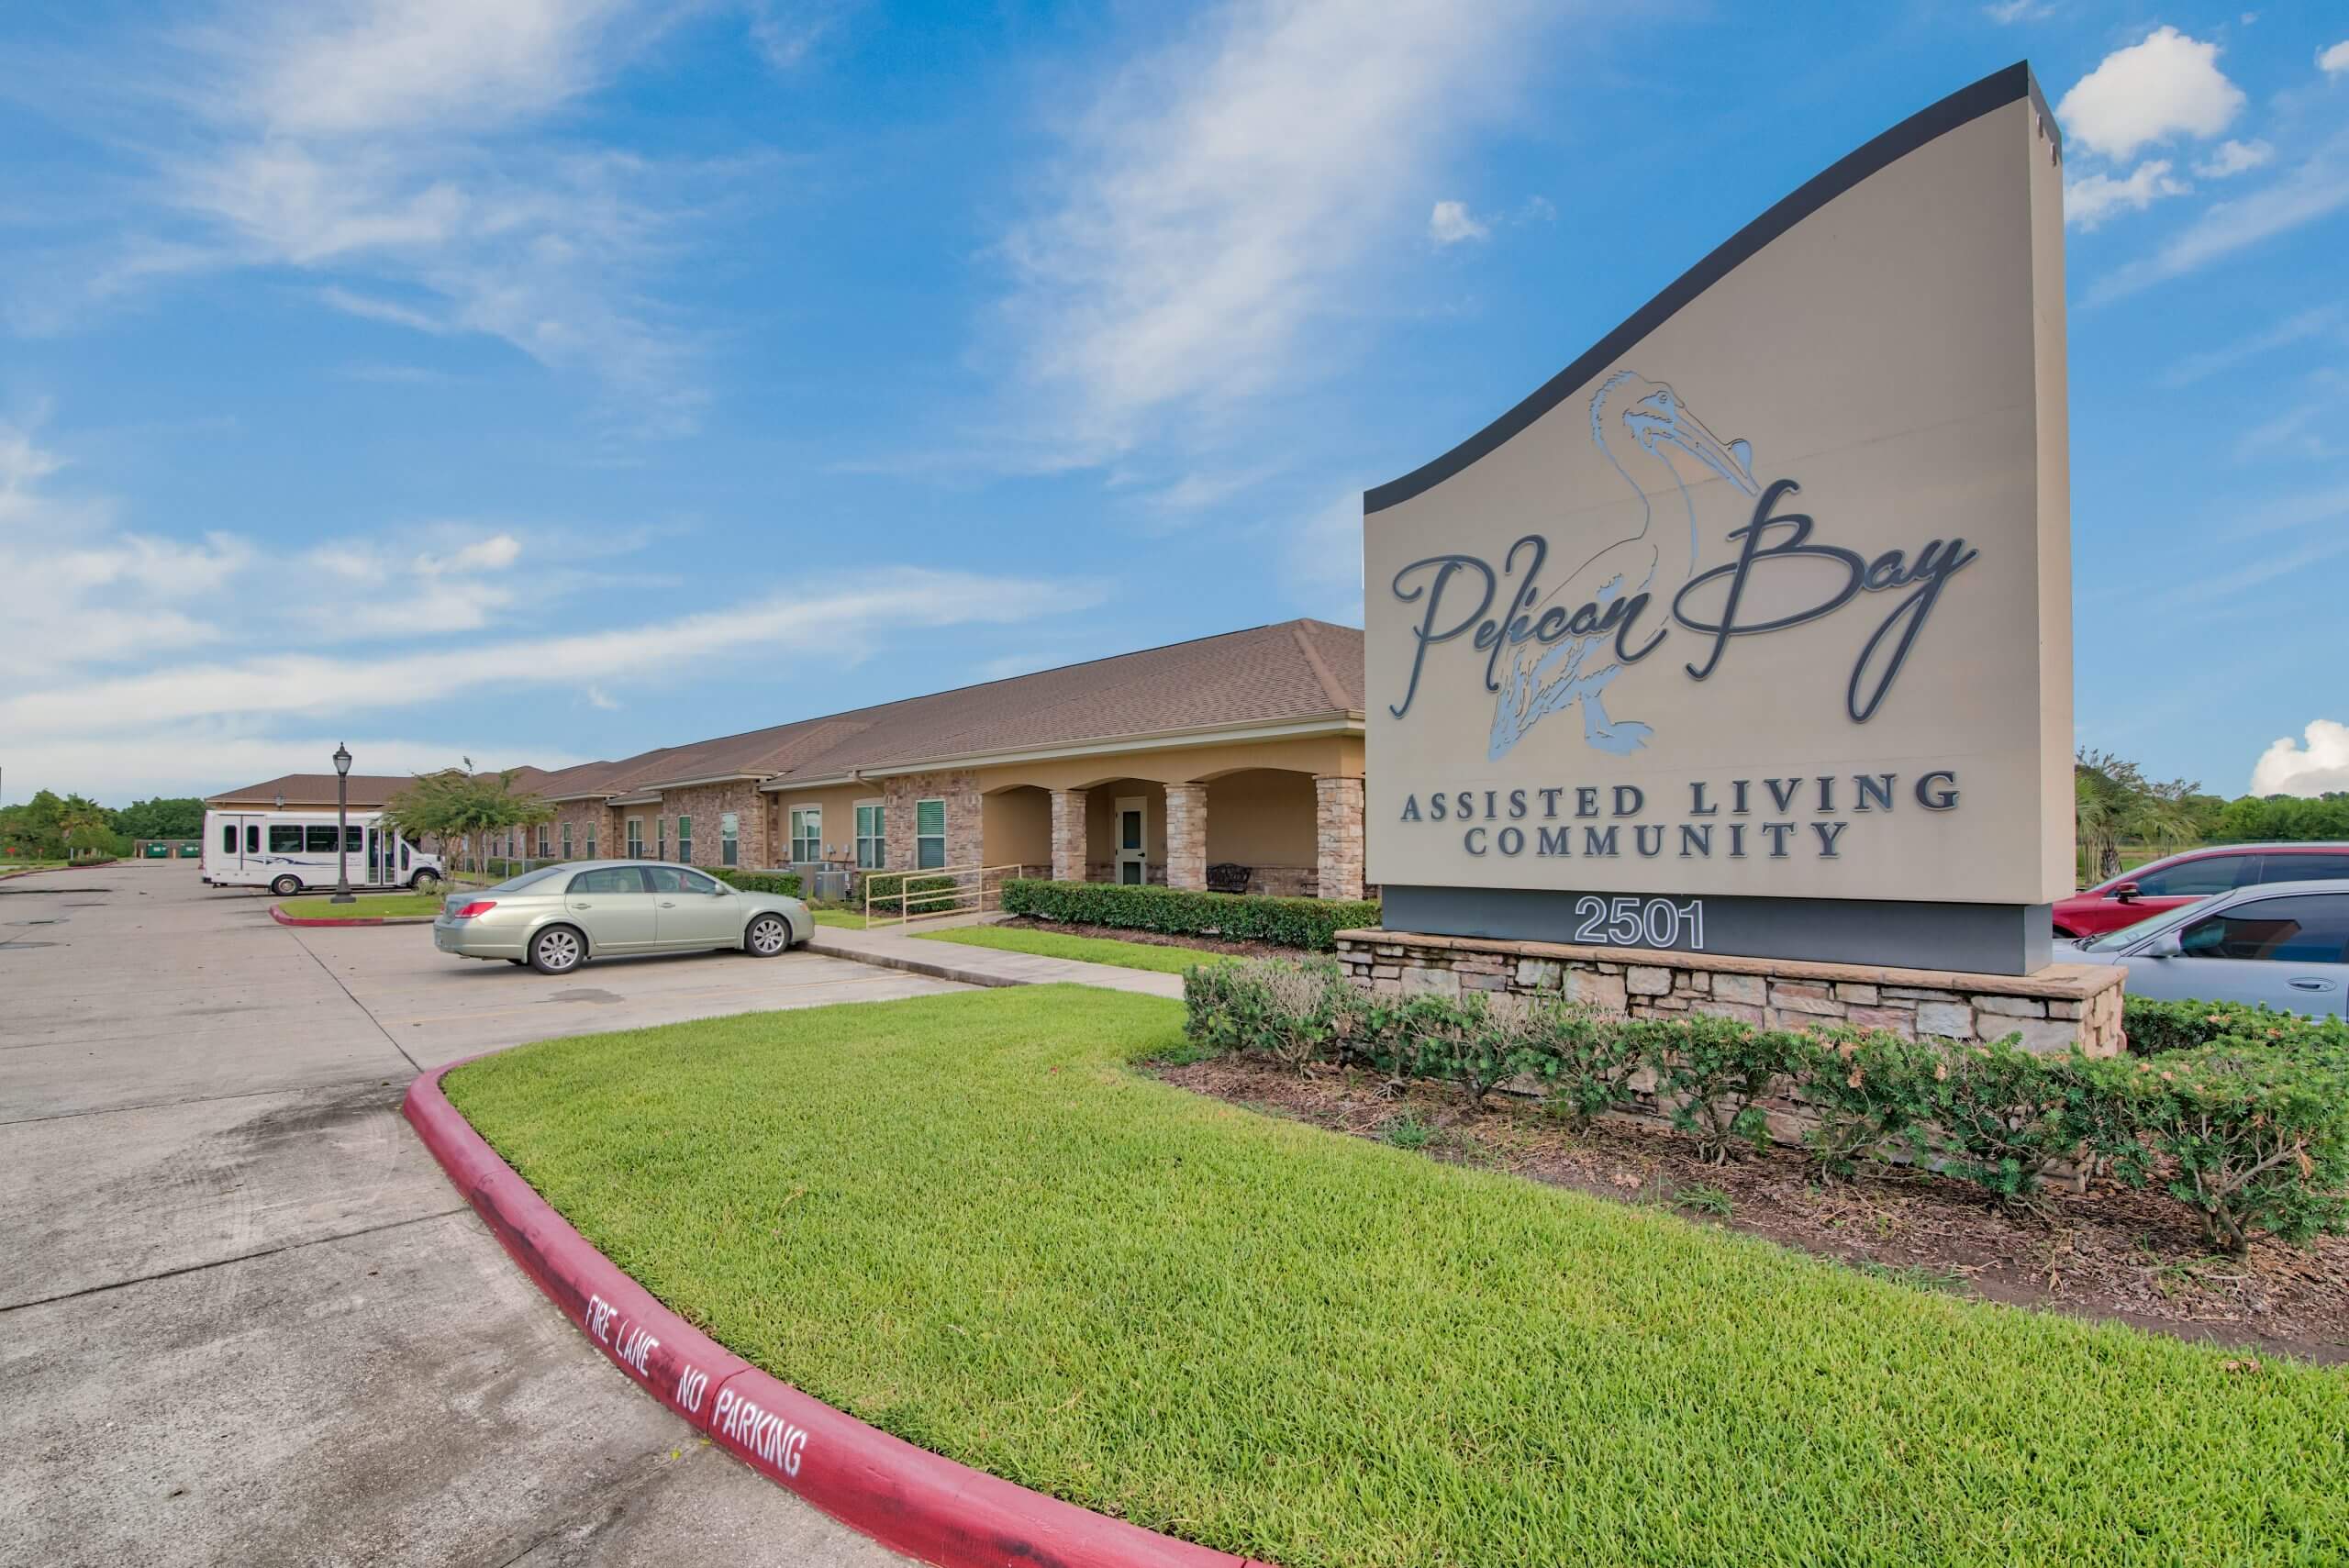 Entrance of Pelican Bay Assisted Living and memory care community in Beaumont, TX